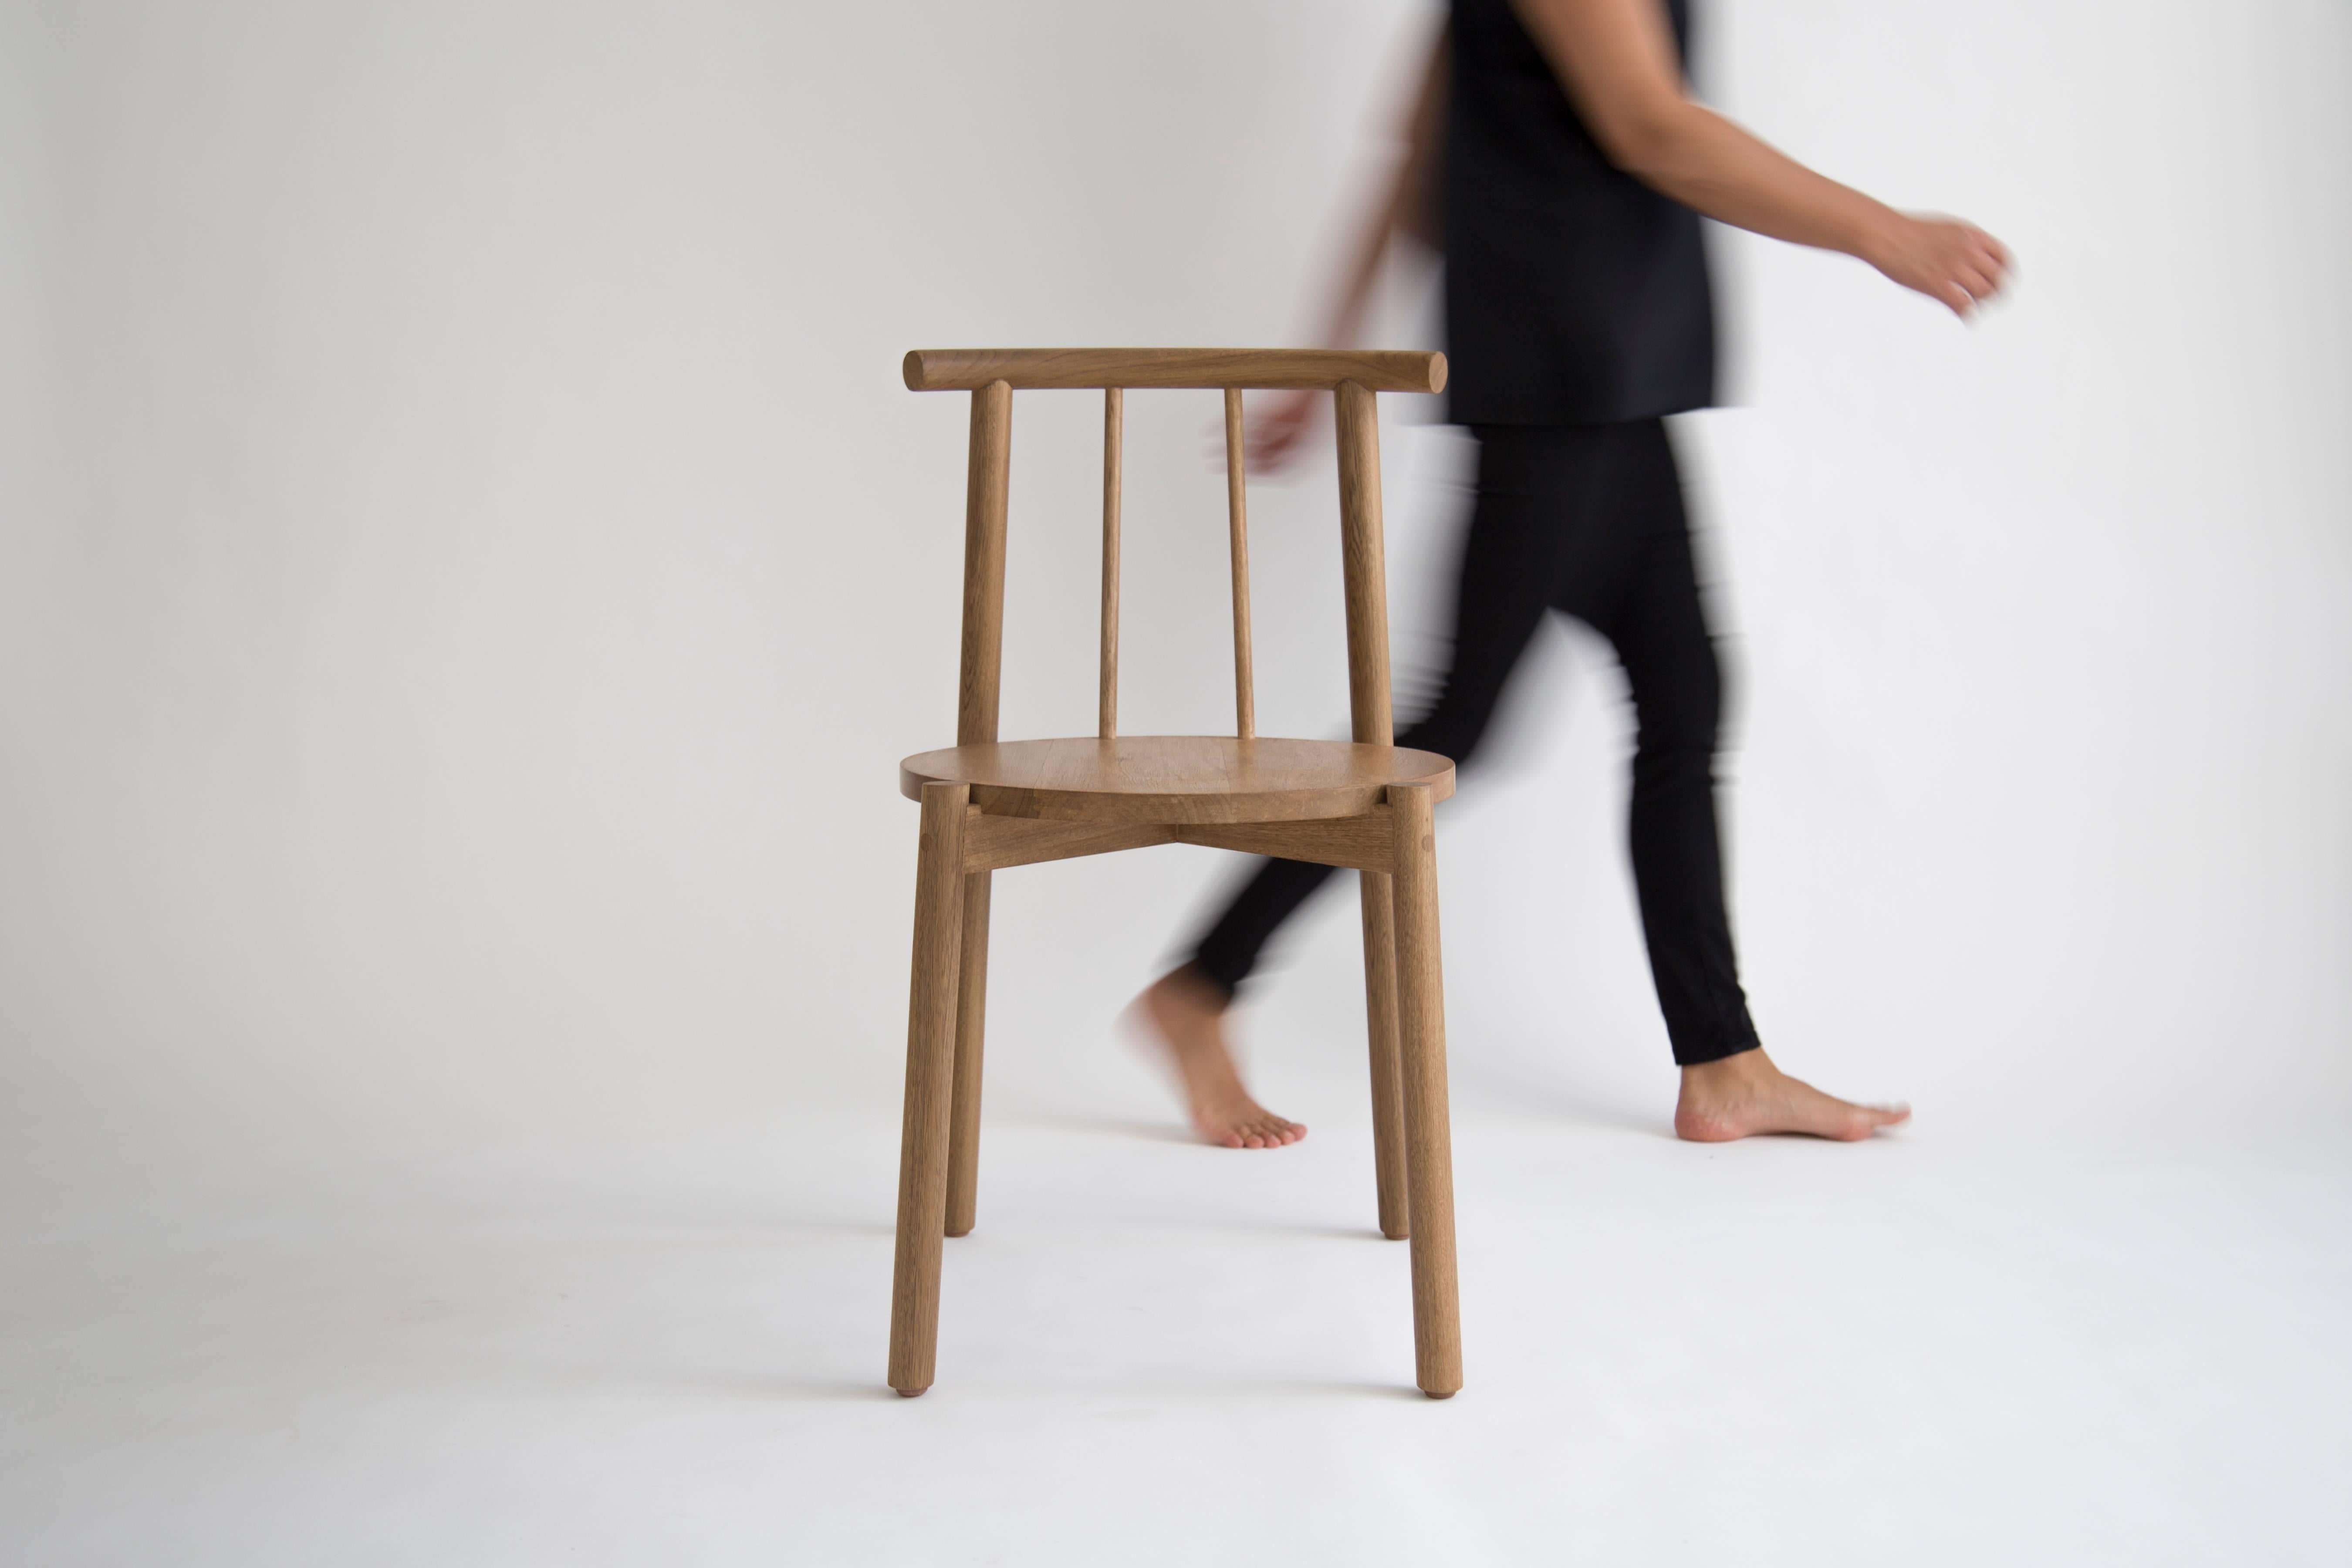 A chair for all occasions, from the ordinary to the extraordinary. This chair serves as a synthesis of structure and form, both remarked by its constructive clarity and silent beauty. Crafted by fine cabinetmakers in western Mexico, this chair